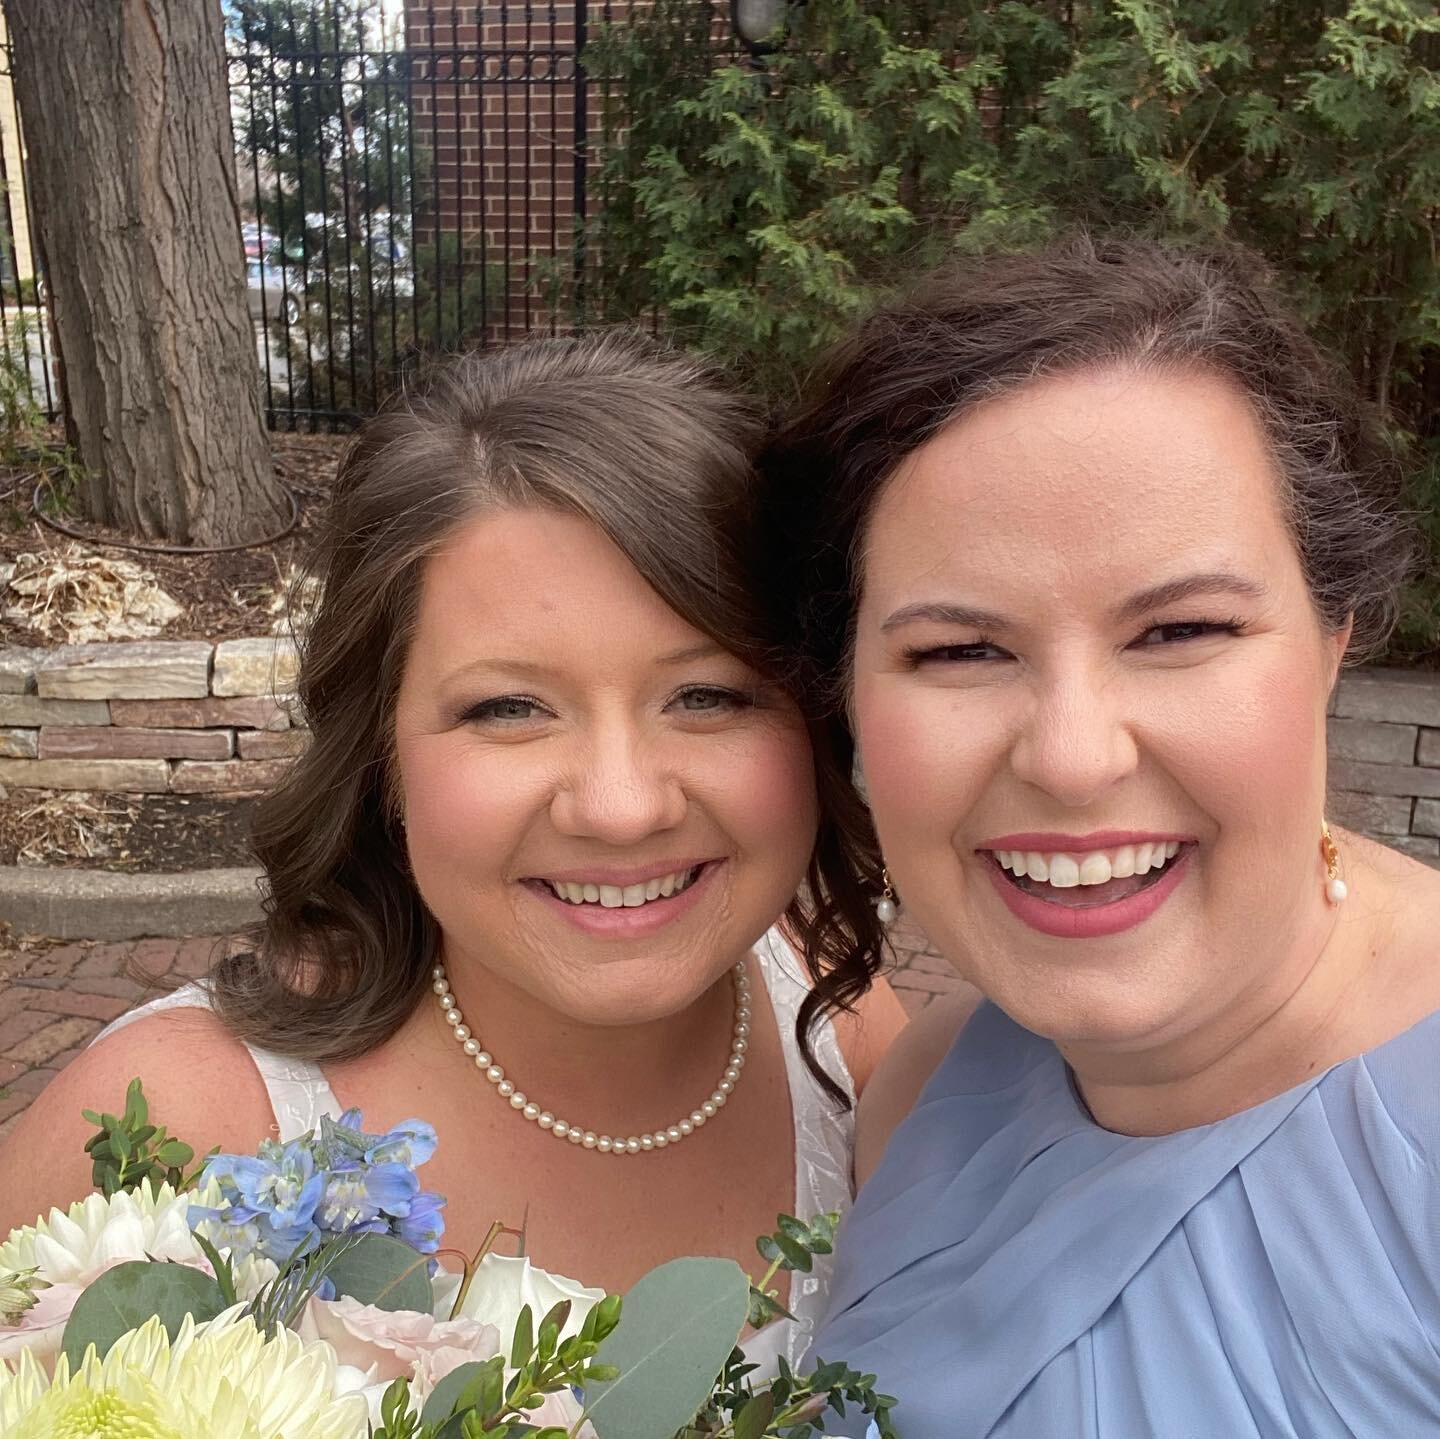 My best friend became a Mrs. yesterday! She was the most beautiful bride, and the newlyweds threw a party we&rsquo;ll be talking about for years to come :)